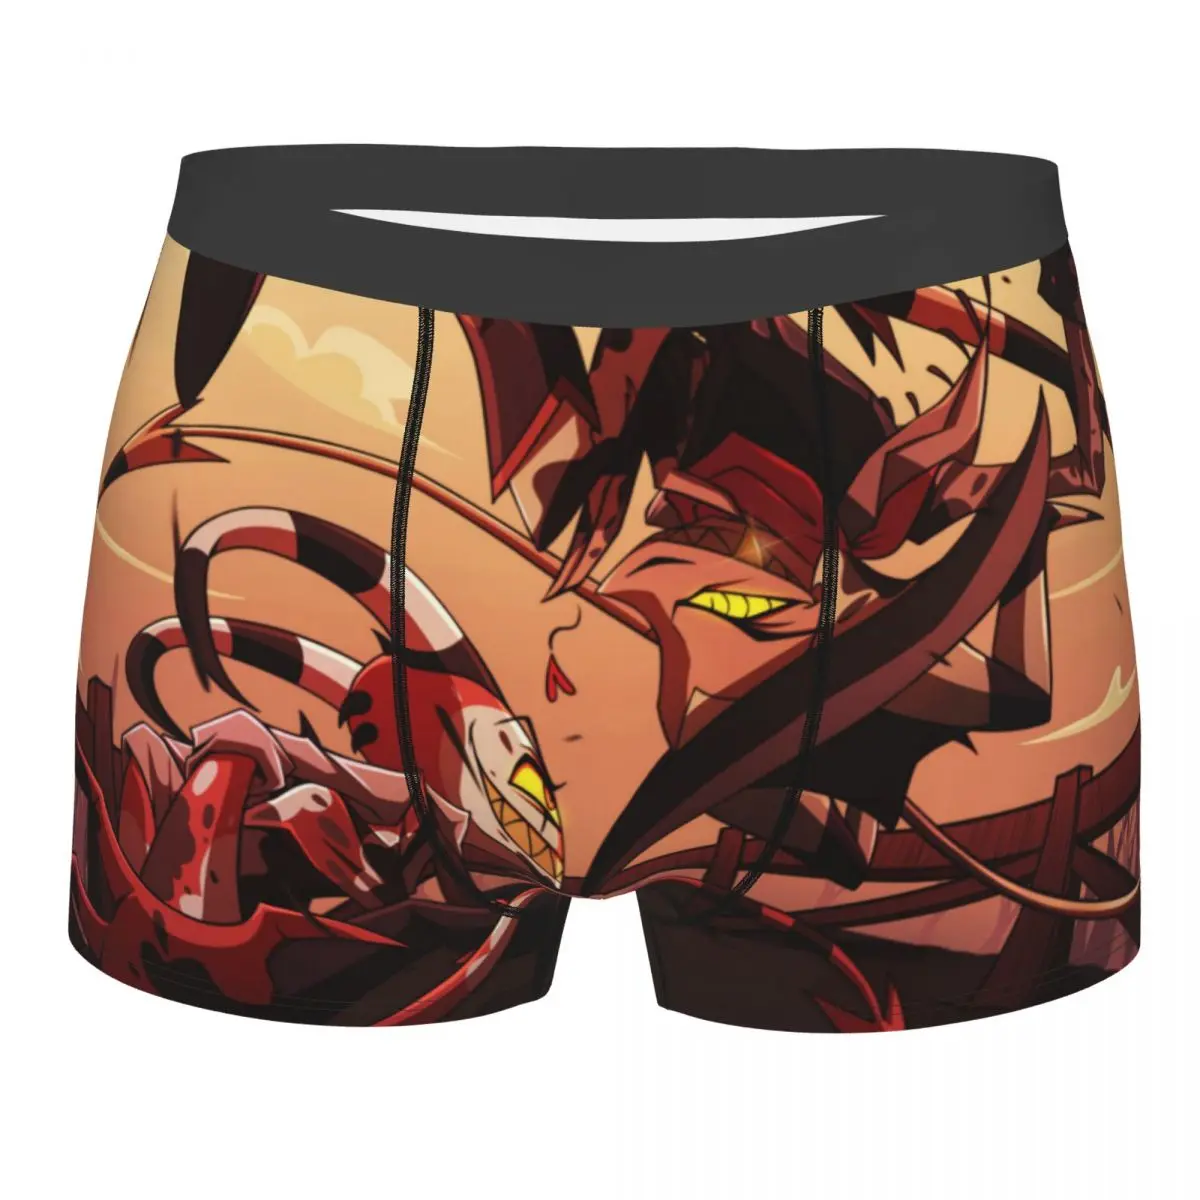 

Fight Men Boxer Briefs Underwear Helluva Boss Blitzo Adult Animation Highly Breathable Top Quality Sexy Shorts Gift Idea